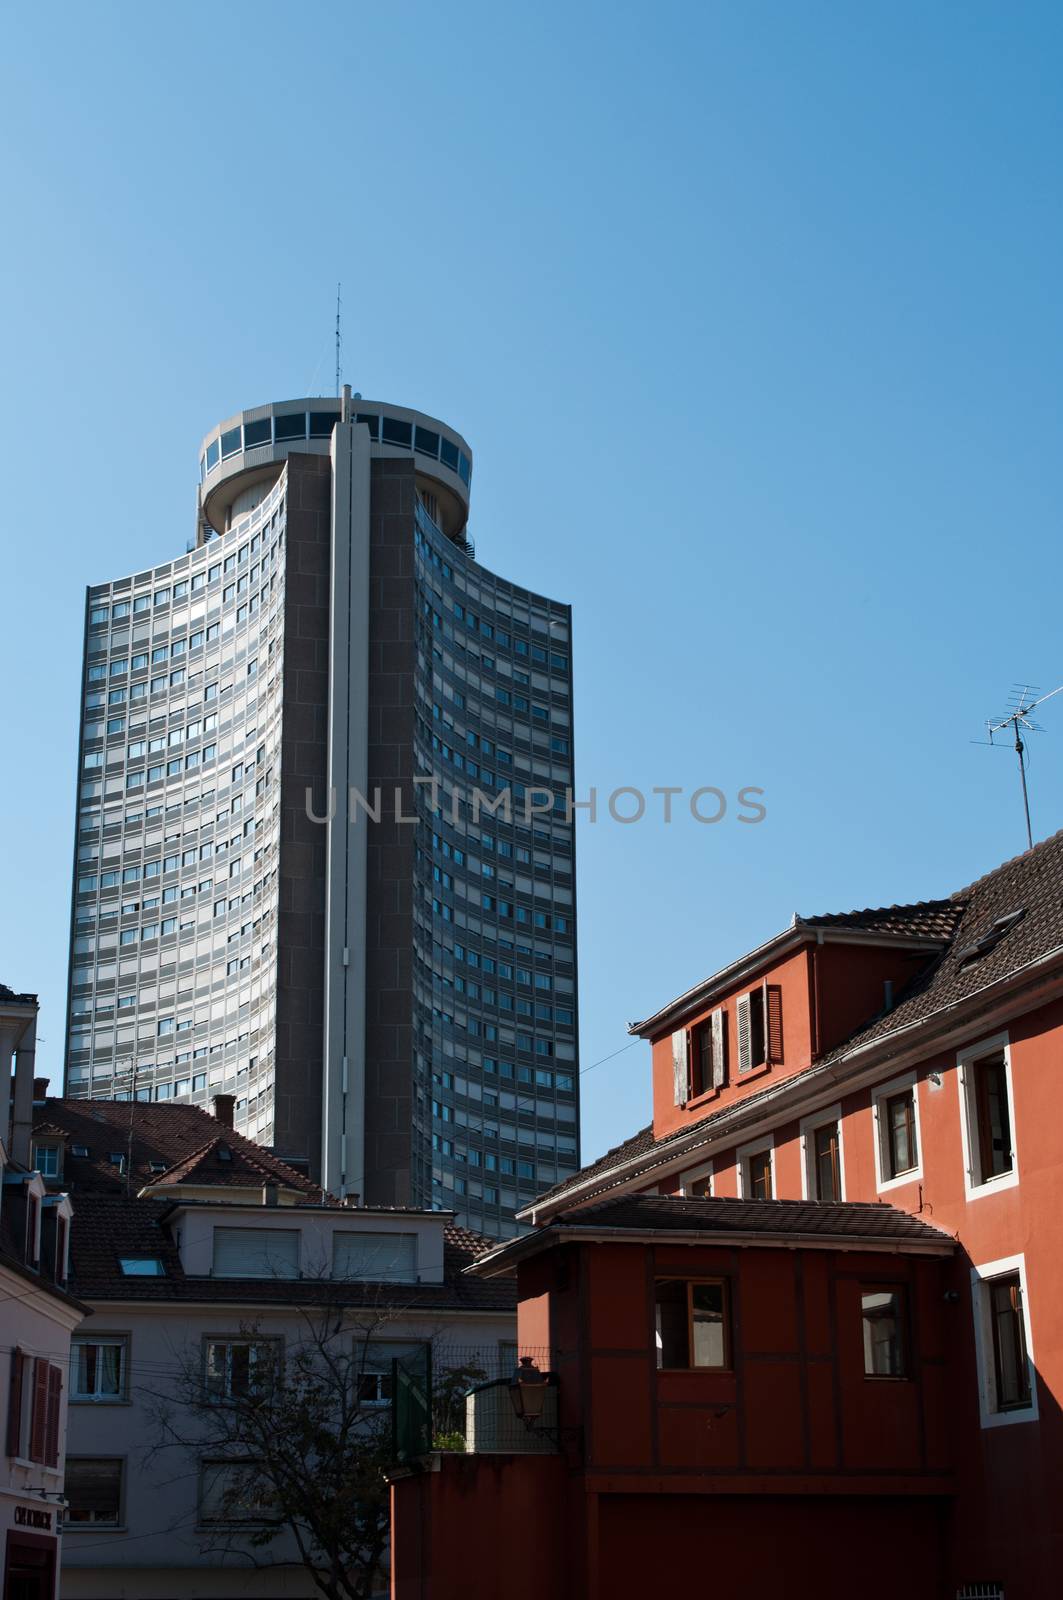 Mulhouse - France - 31 th July 2014 - European tower in Mulhouse by NeydtStock